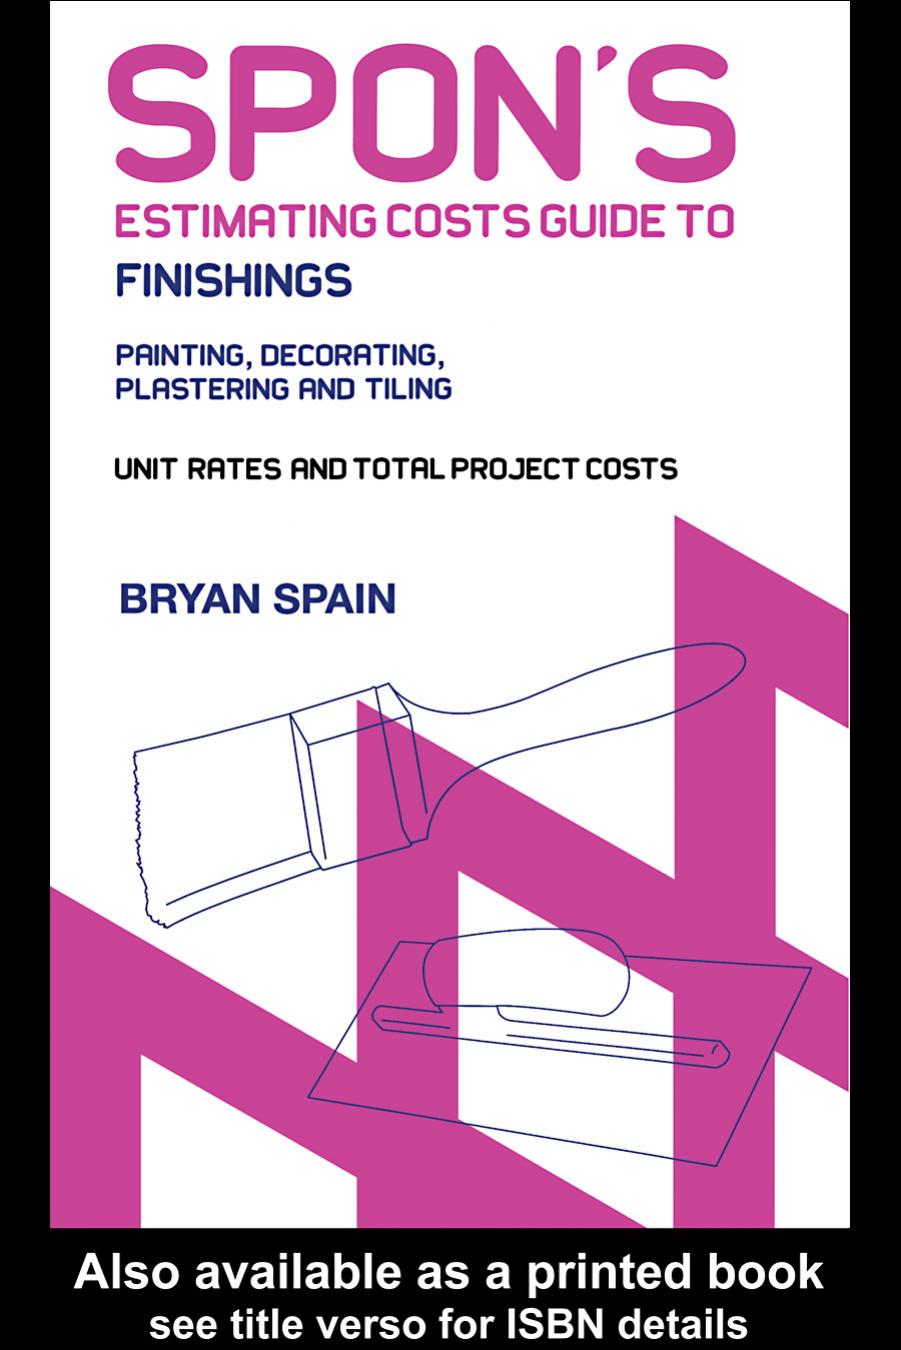 Spon’s Estimating Costs Guide to Finishings: Painting, Decorating, Plastering and Tiling Unit Rates and Project Costs